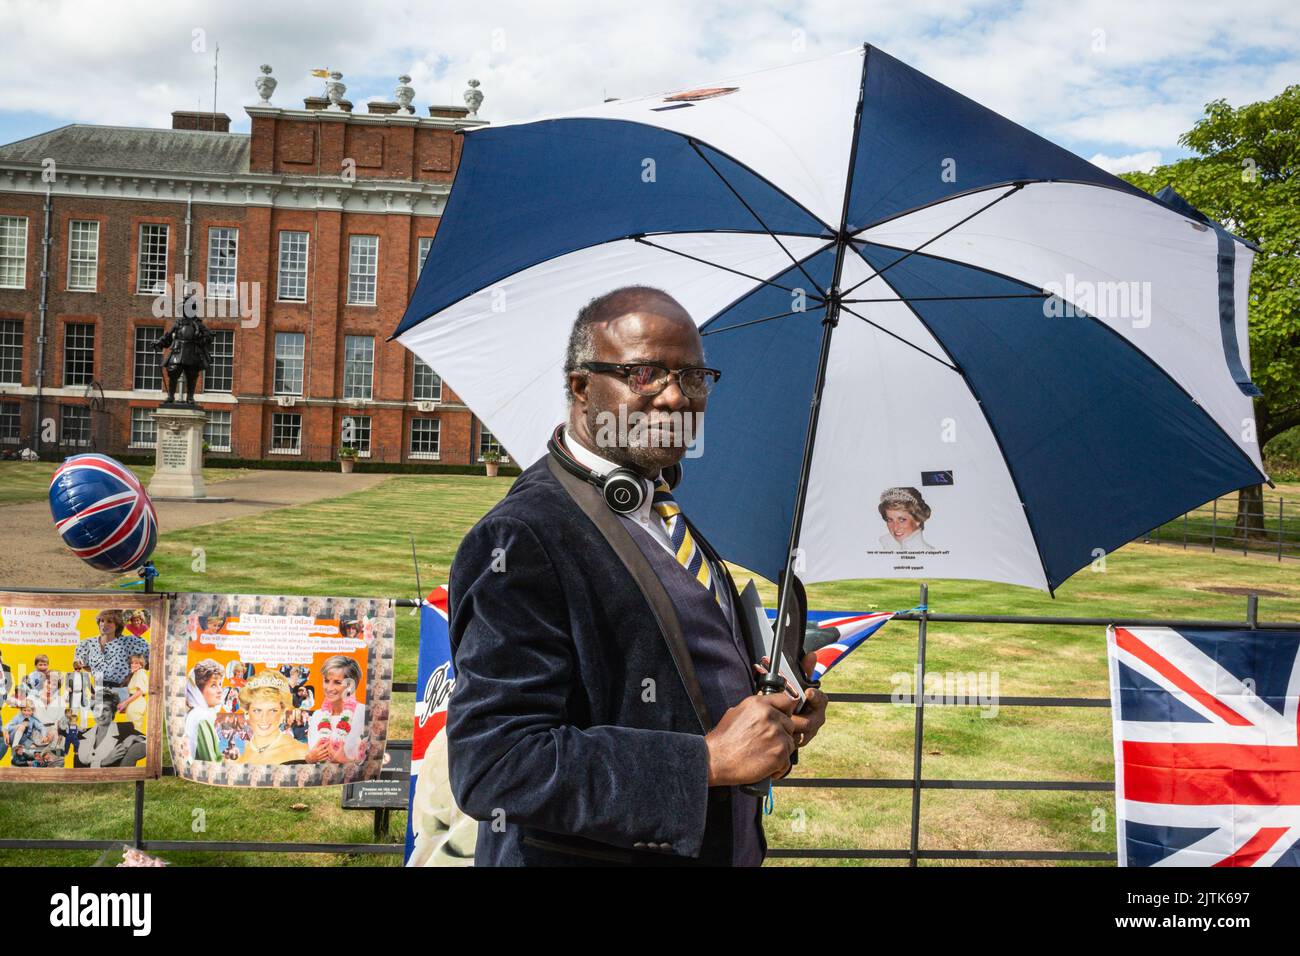 London, UK. 31st Aug, 2022. Royal fans and visitors gather at the gates to Kensington Palace to commemorate the 25th anniversary of th tragic death of Diana Princess of Wales. Credit: Imageplotter/Alamy Live News Stock Photo